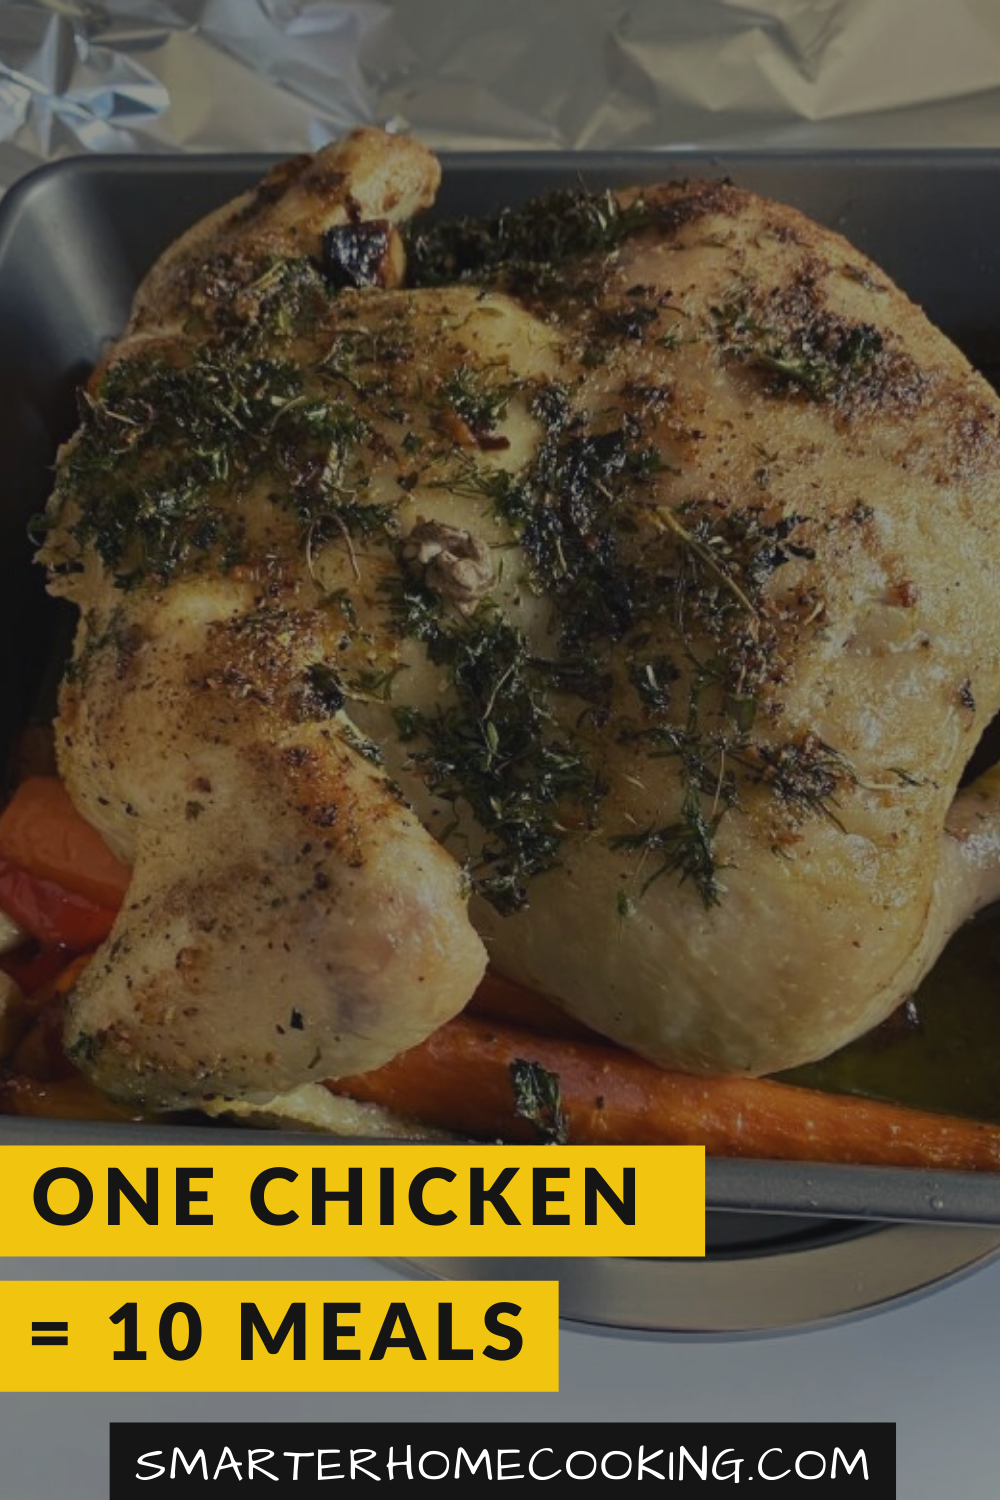 Make 10 Meals From One Chicken